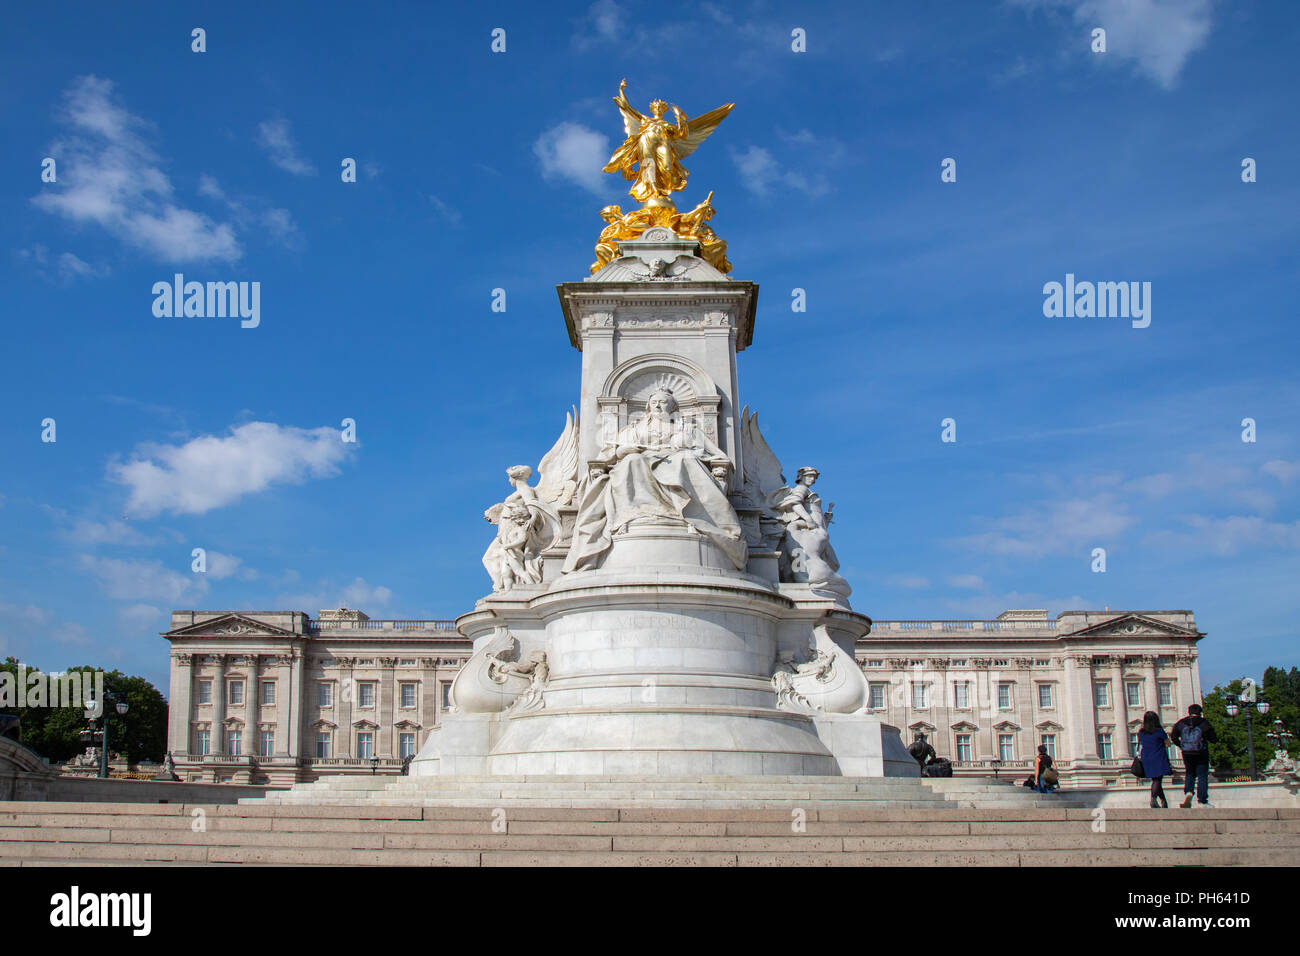 The Victoria Memorial in front of the Buckingham Palace in London England headquarters of the monarch of the United Kingdom Stock Photo